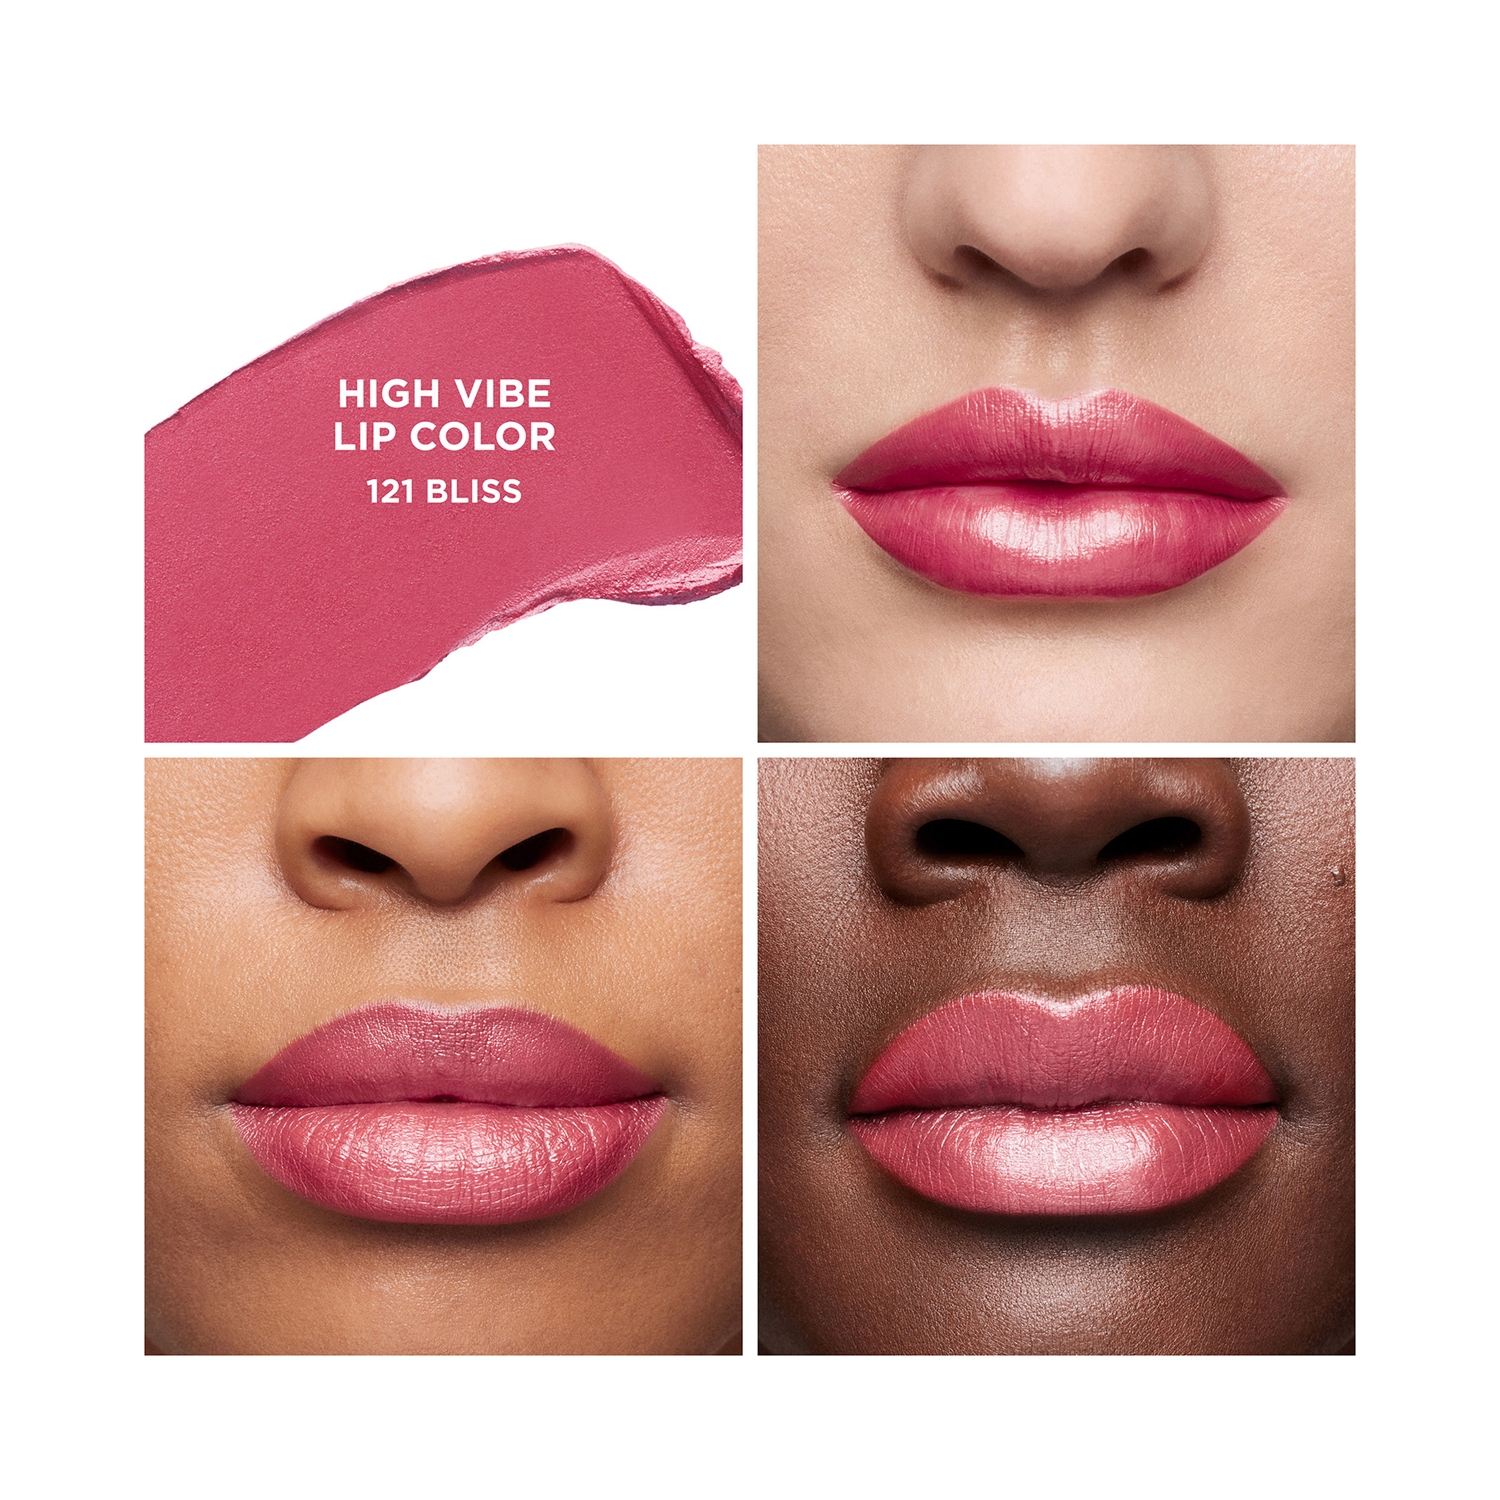 Laura Mercier Bliss High Vibe Lip Color Review & Swatches